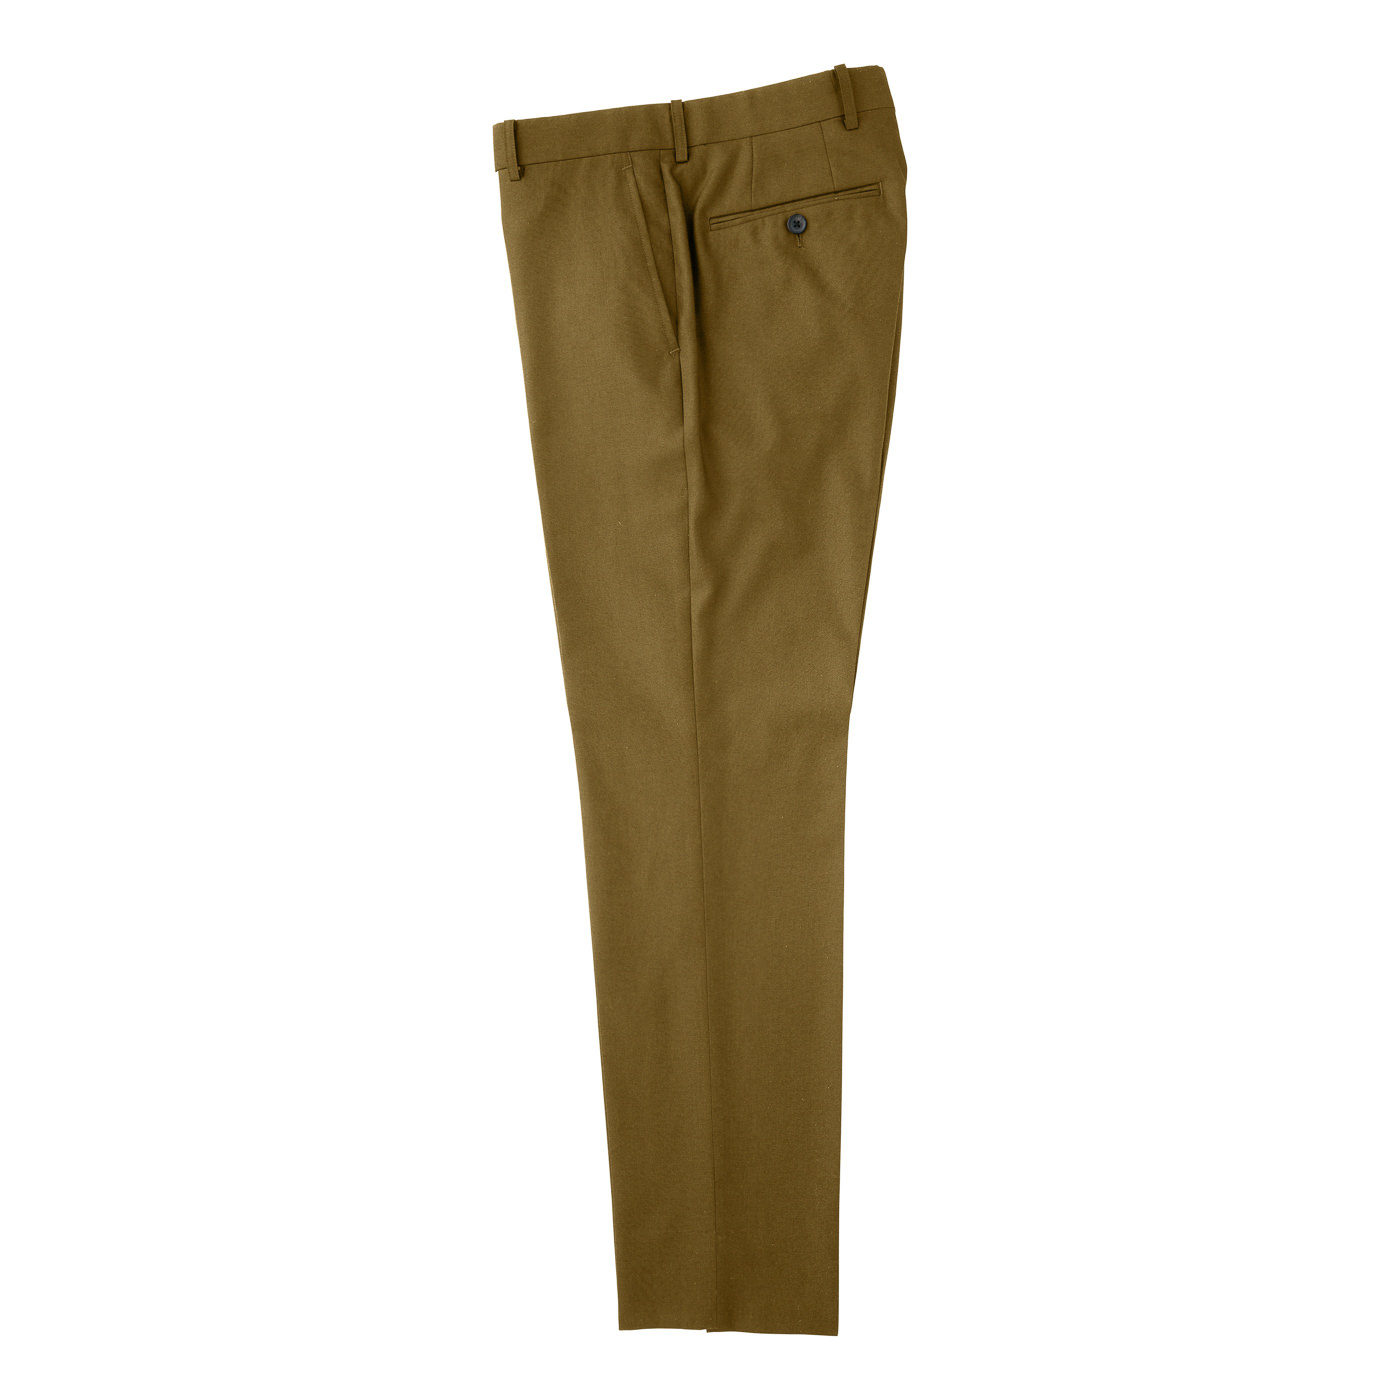 FABRIC TOKYO CHINOS-STRETCH by SOLOTEX - スラックス